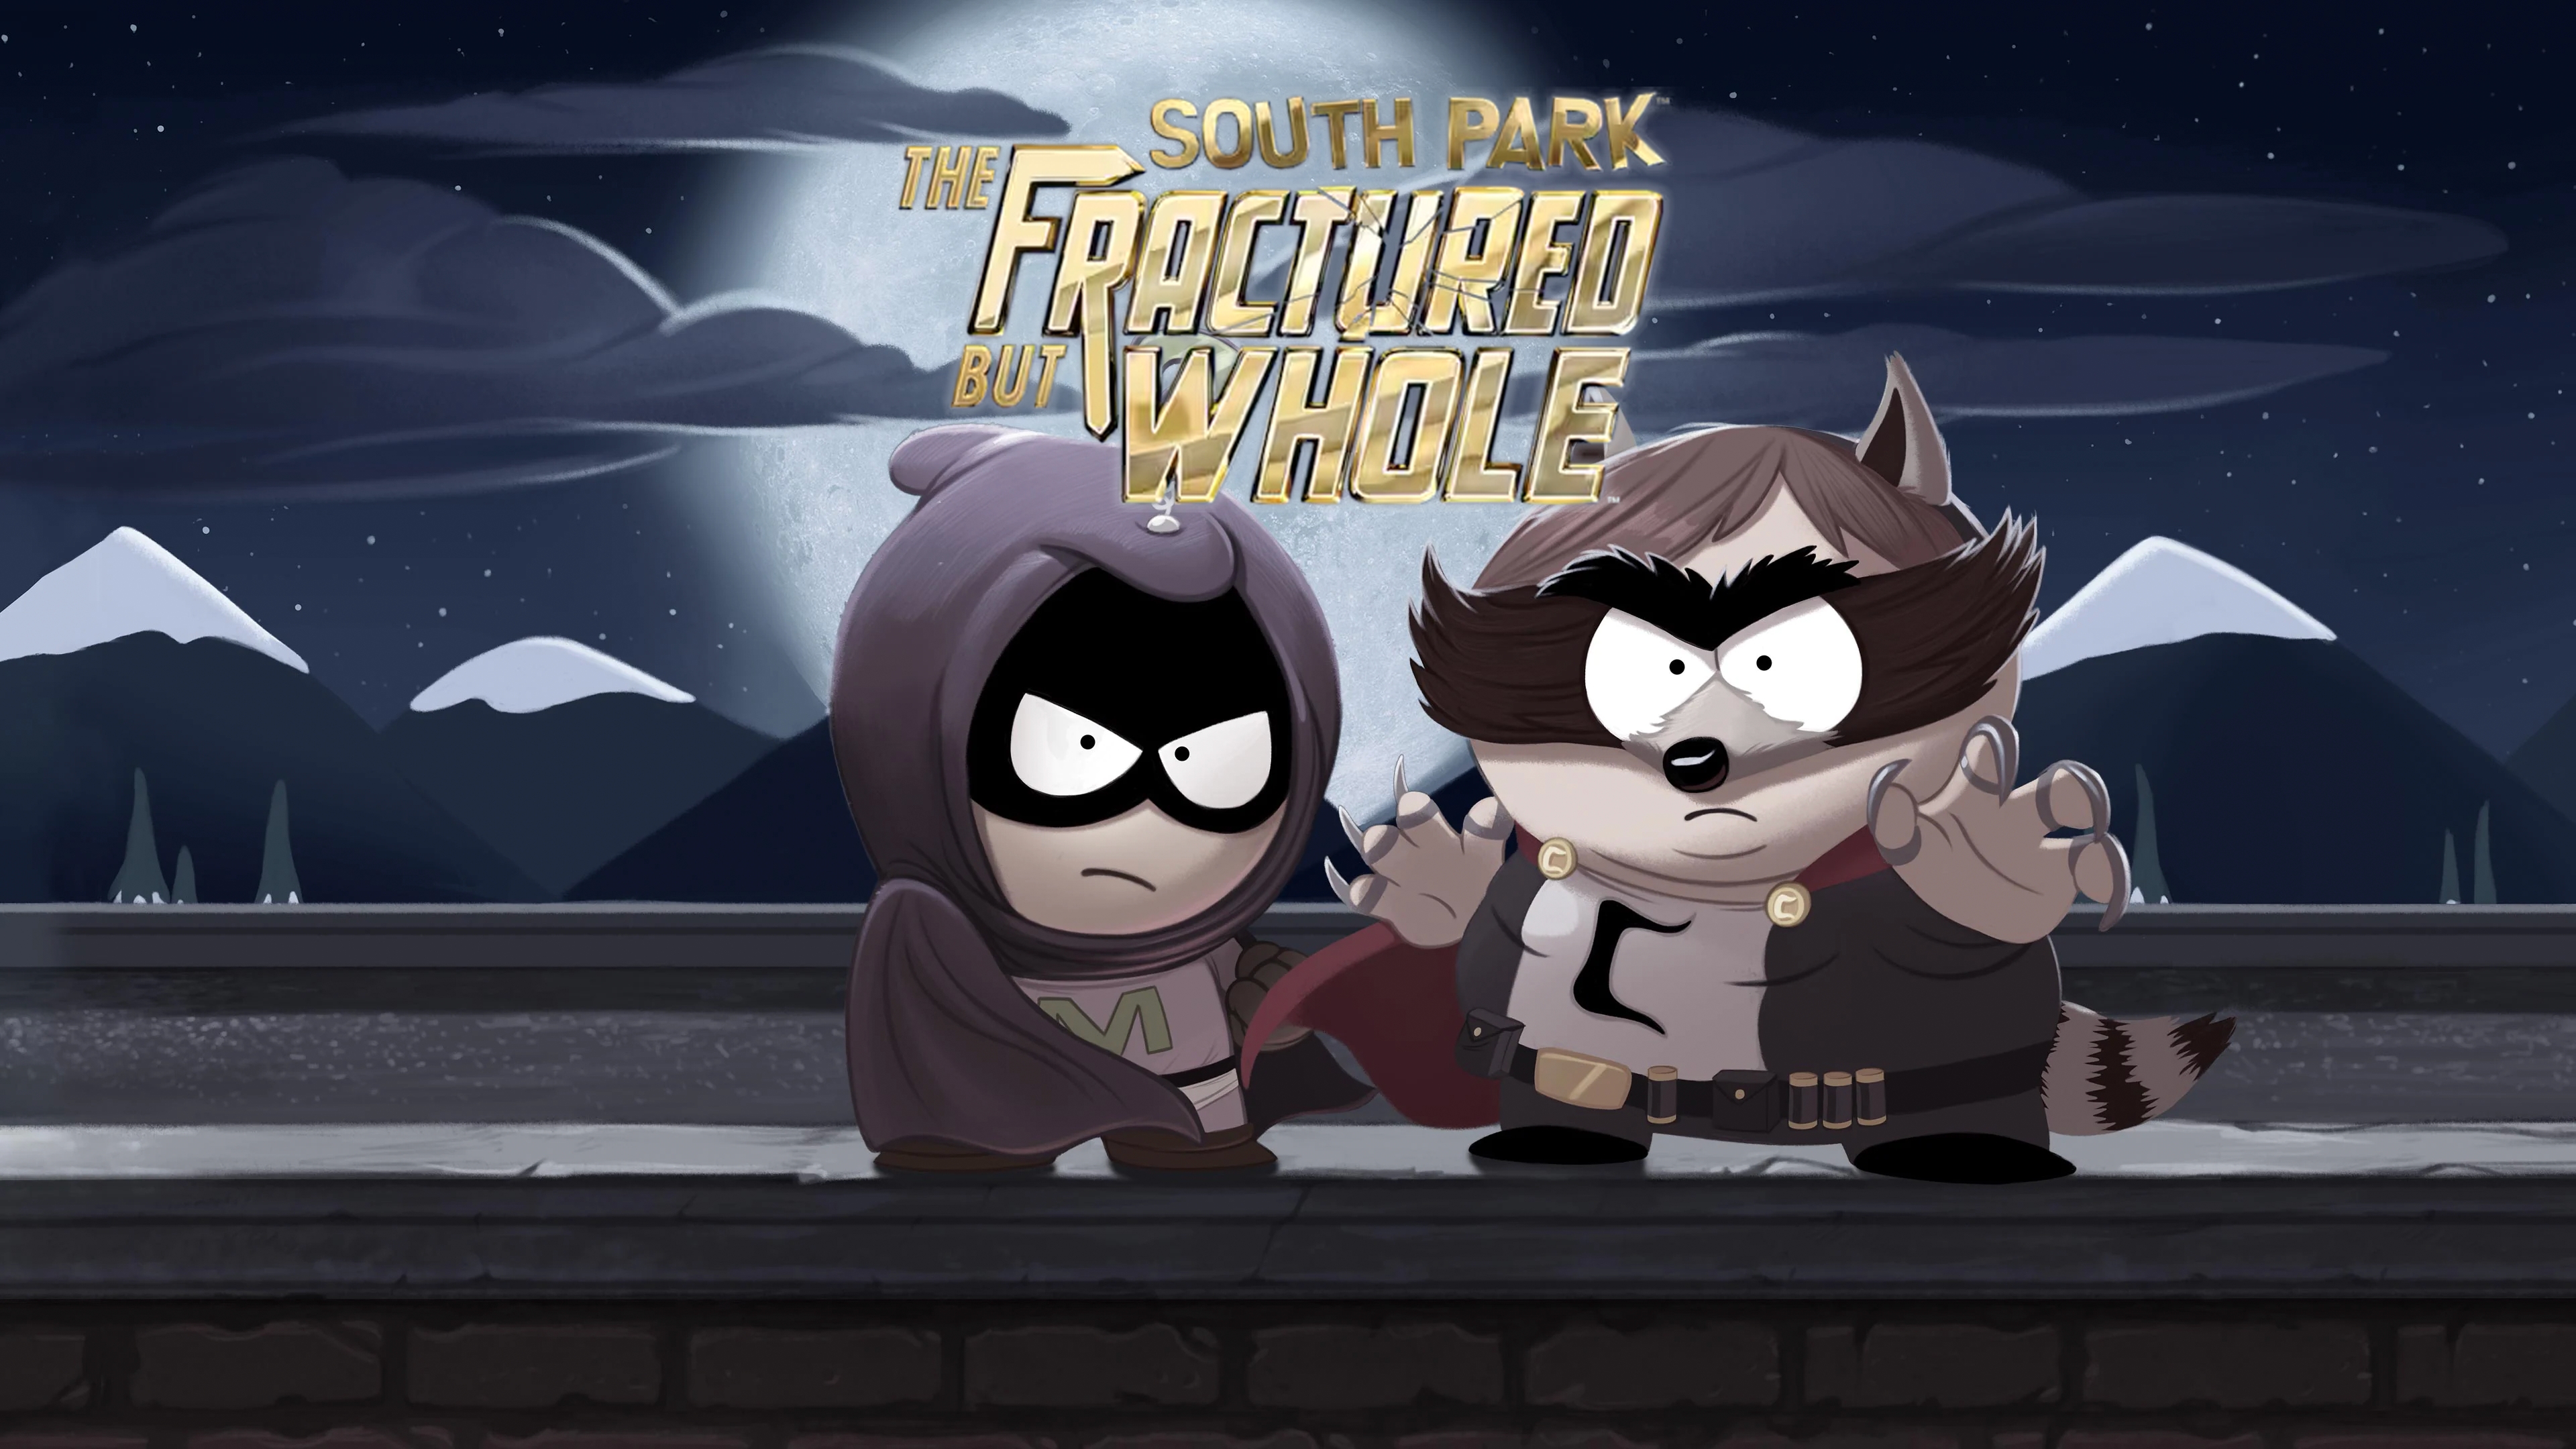 South park the fractured but whole купить ключ steam фото 2